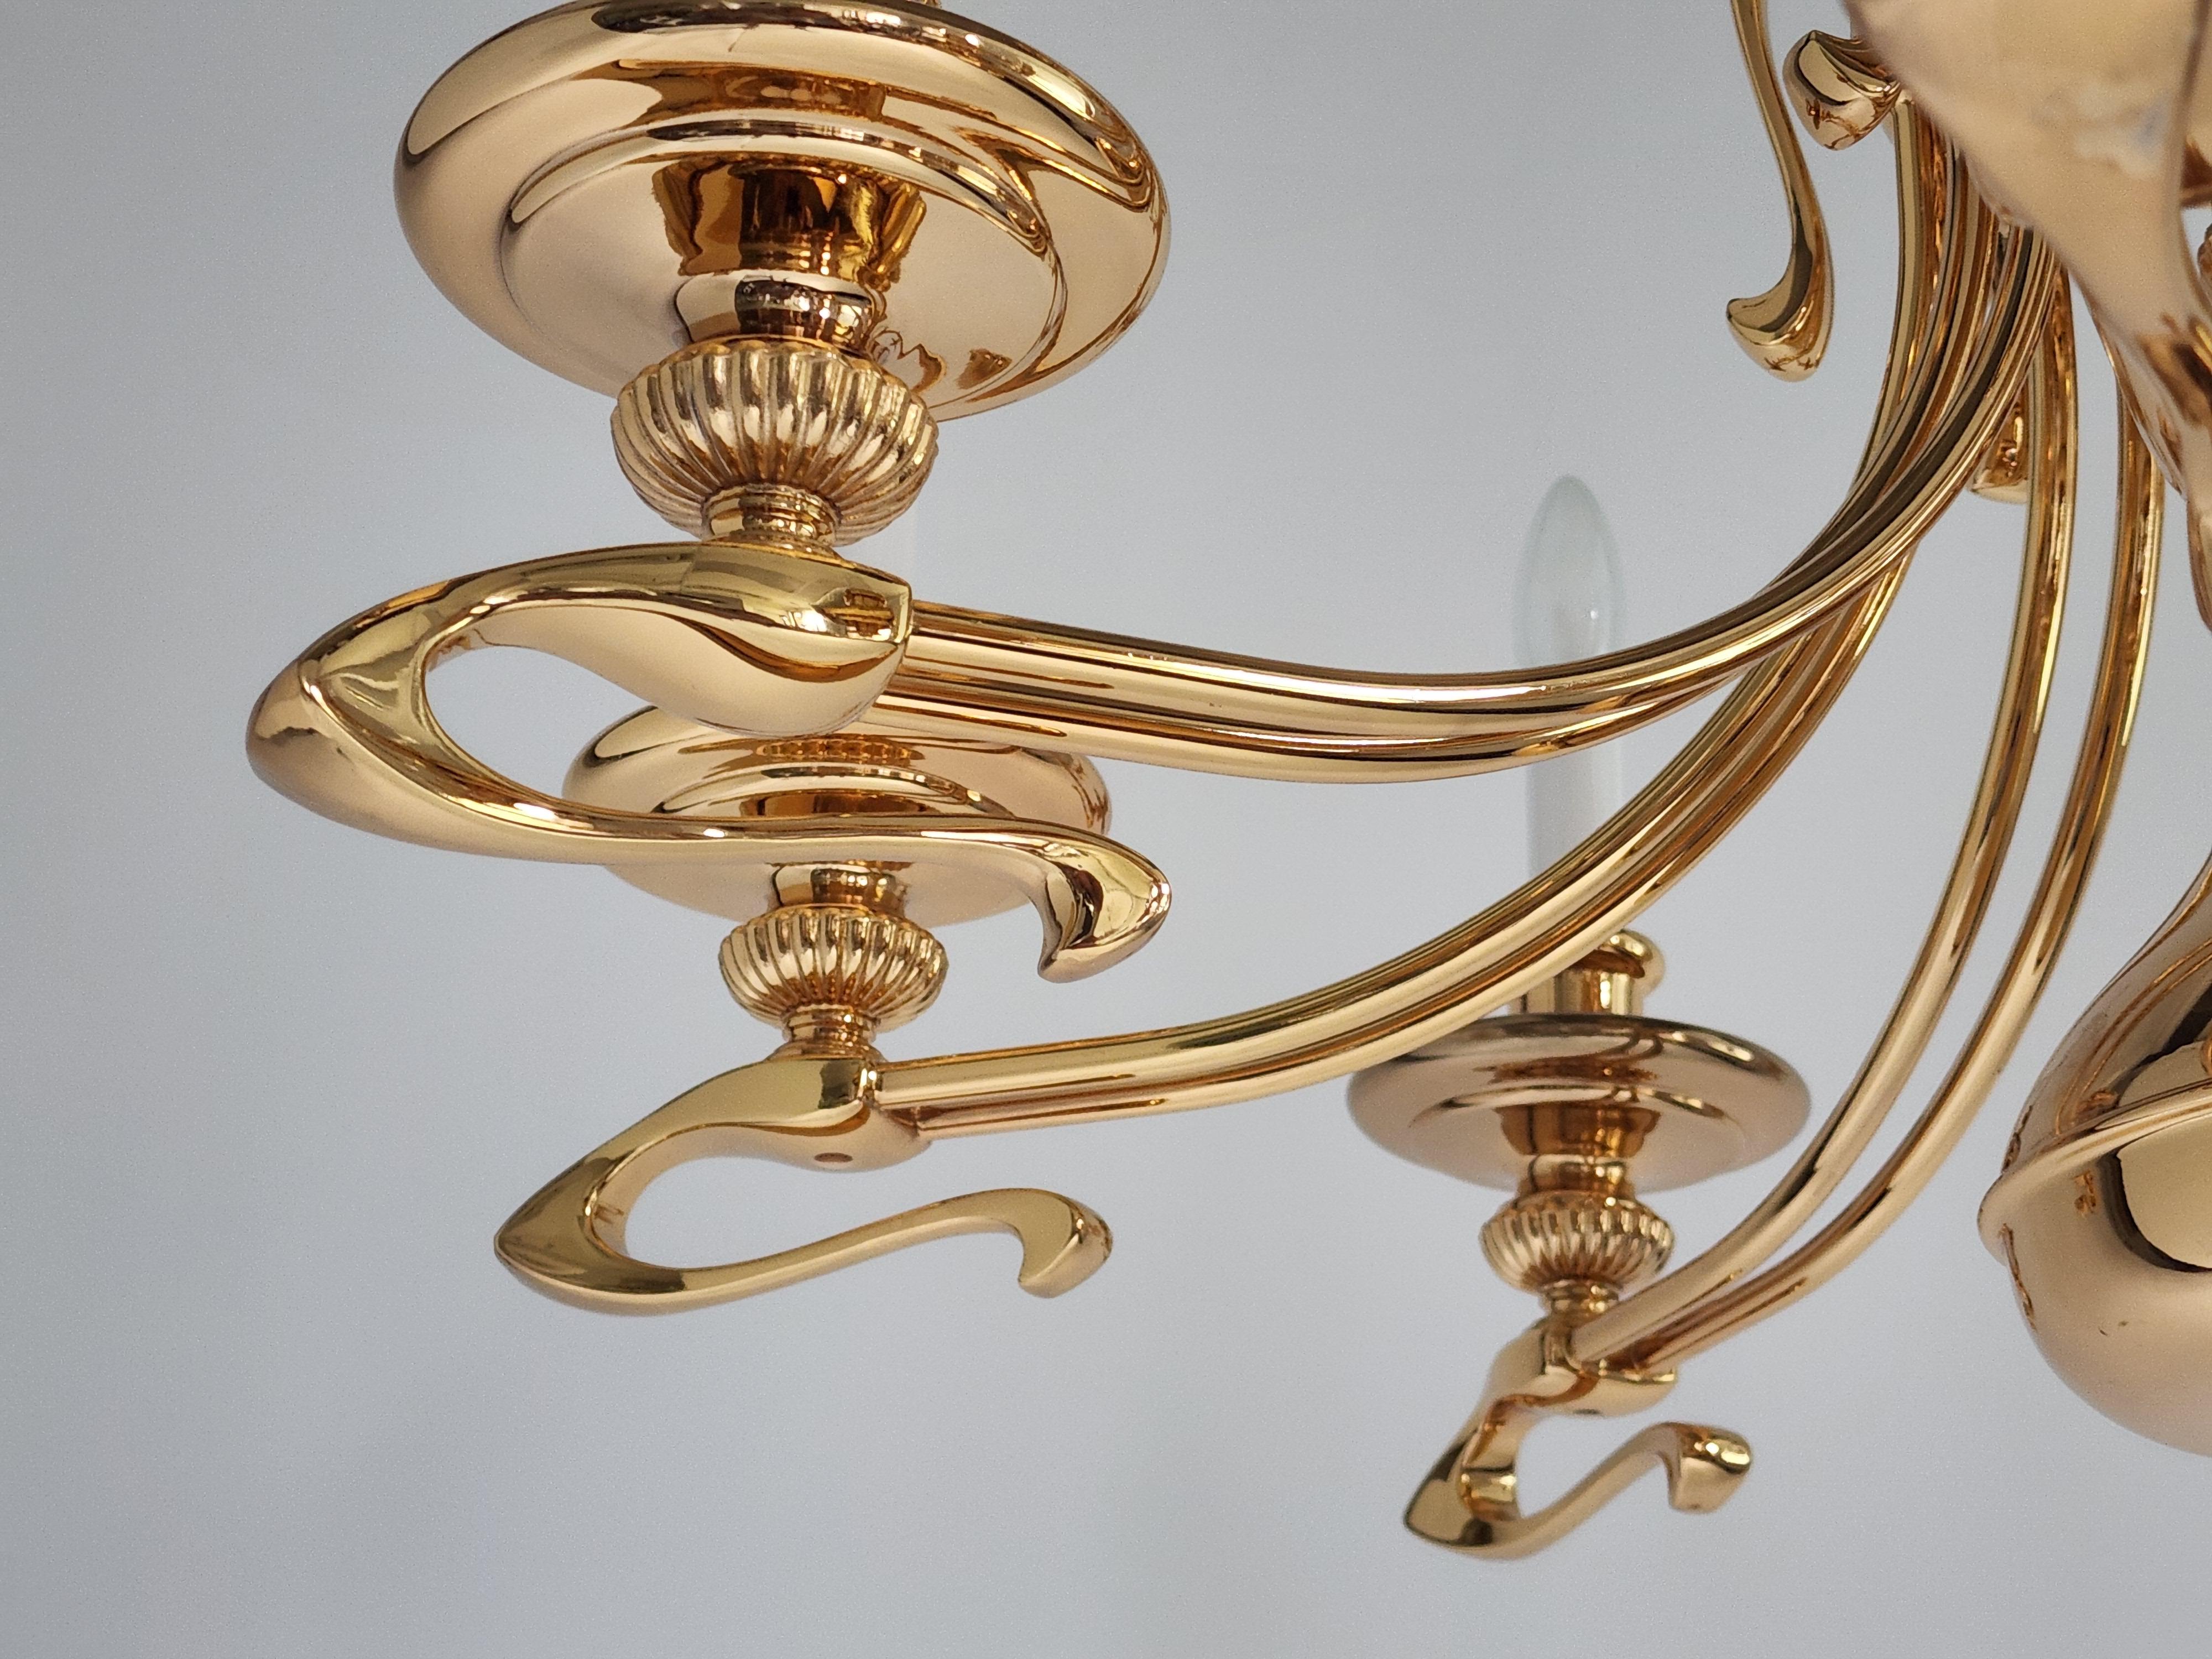 1980s Massive Art Nouveau Style Gold Plated Chandelier, Italy For Sale 10